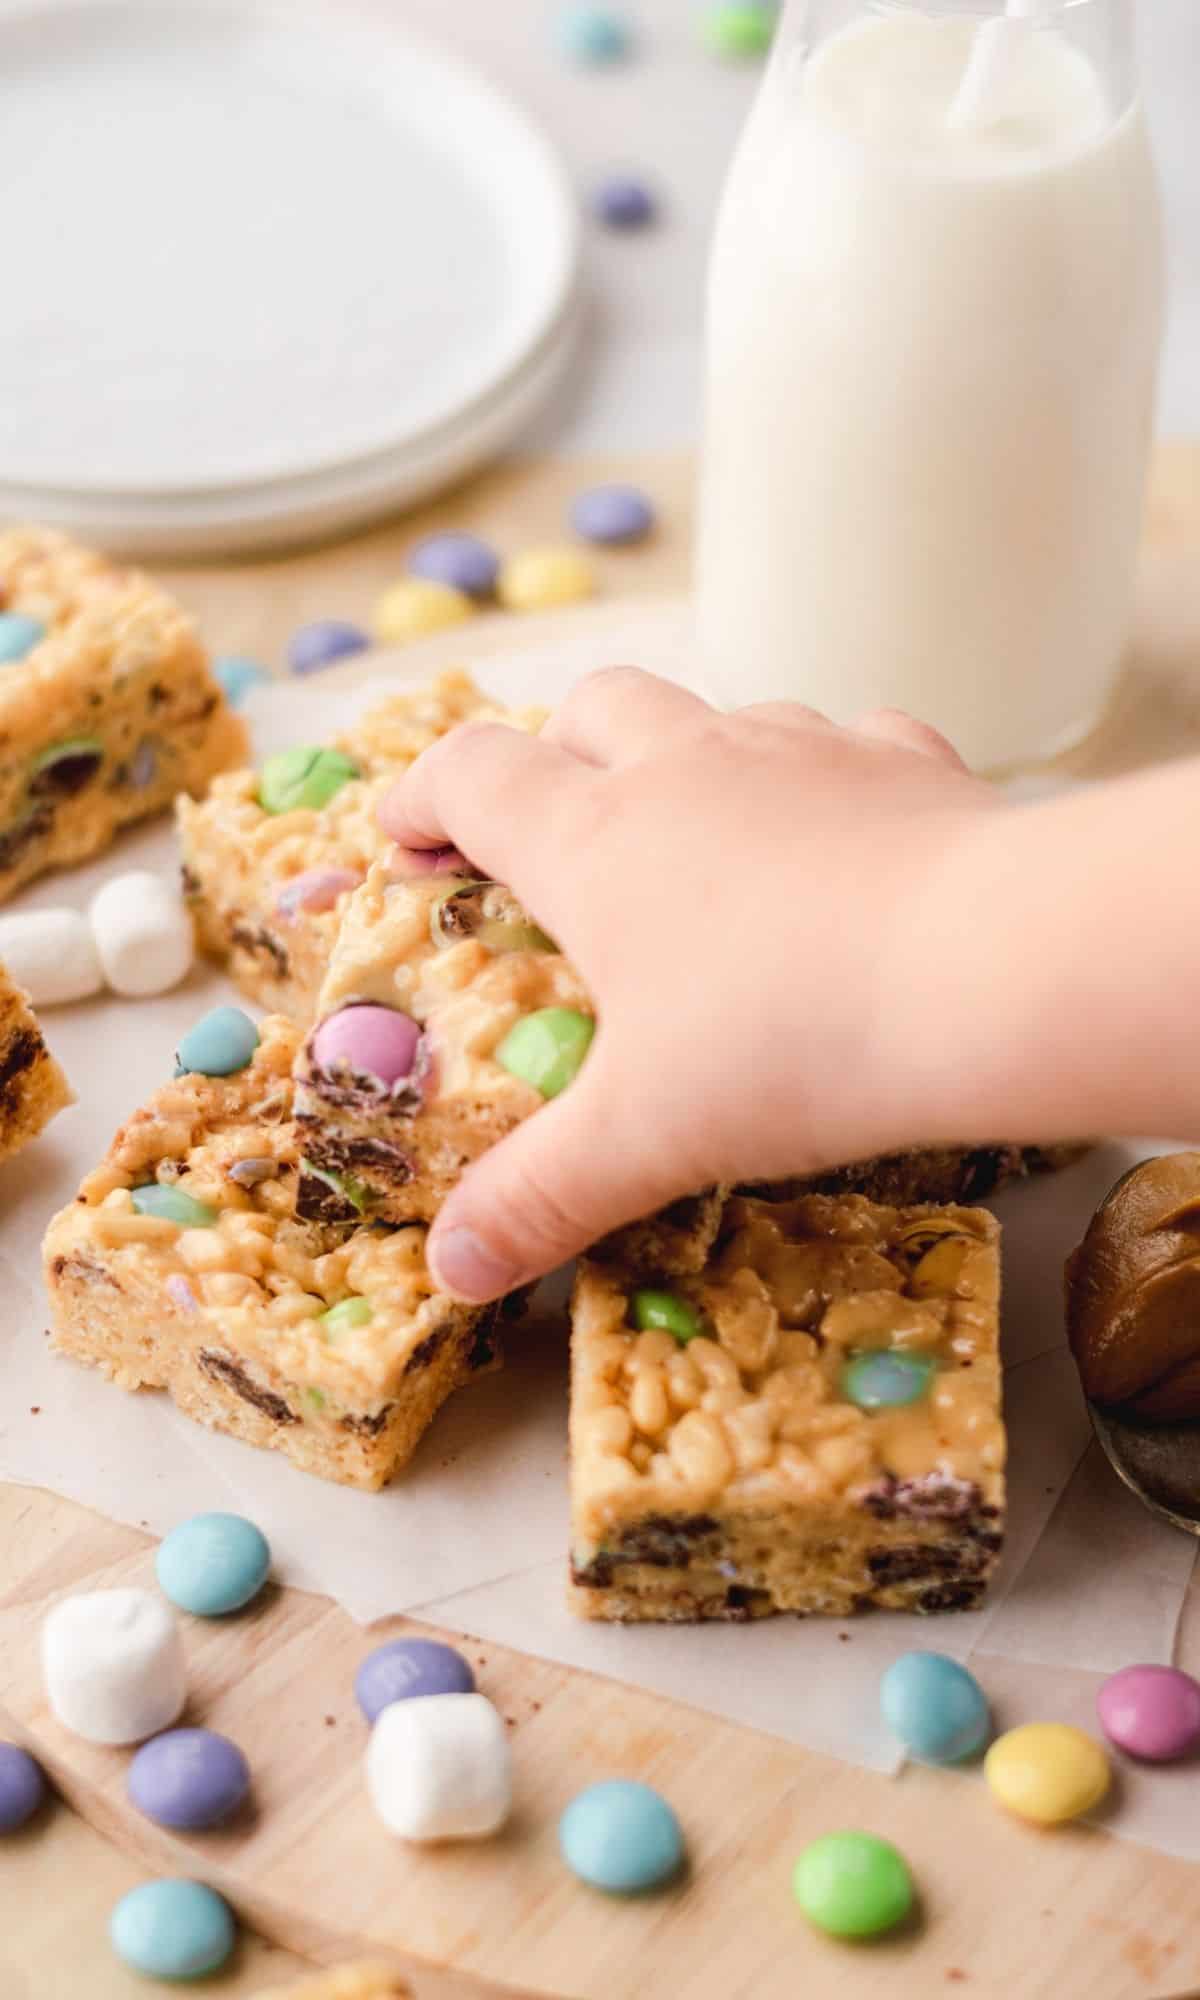 Peanut Butter Rice Krispies Treats with M&M's with a toddler hand grabbing one.